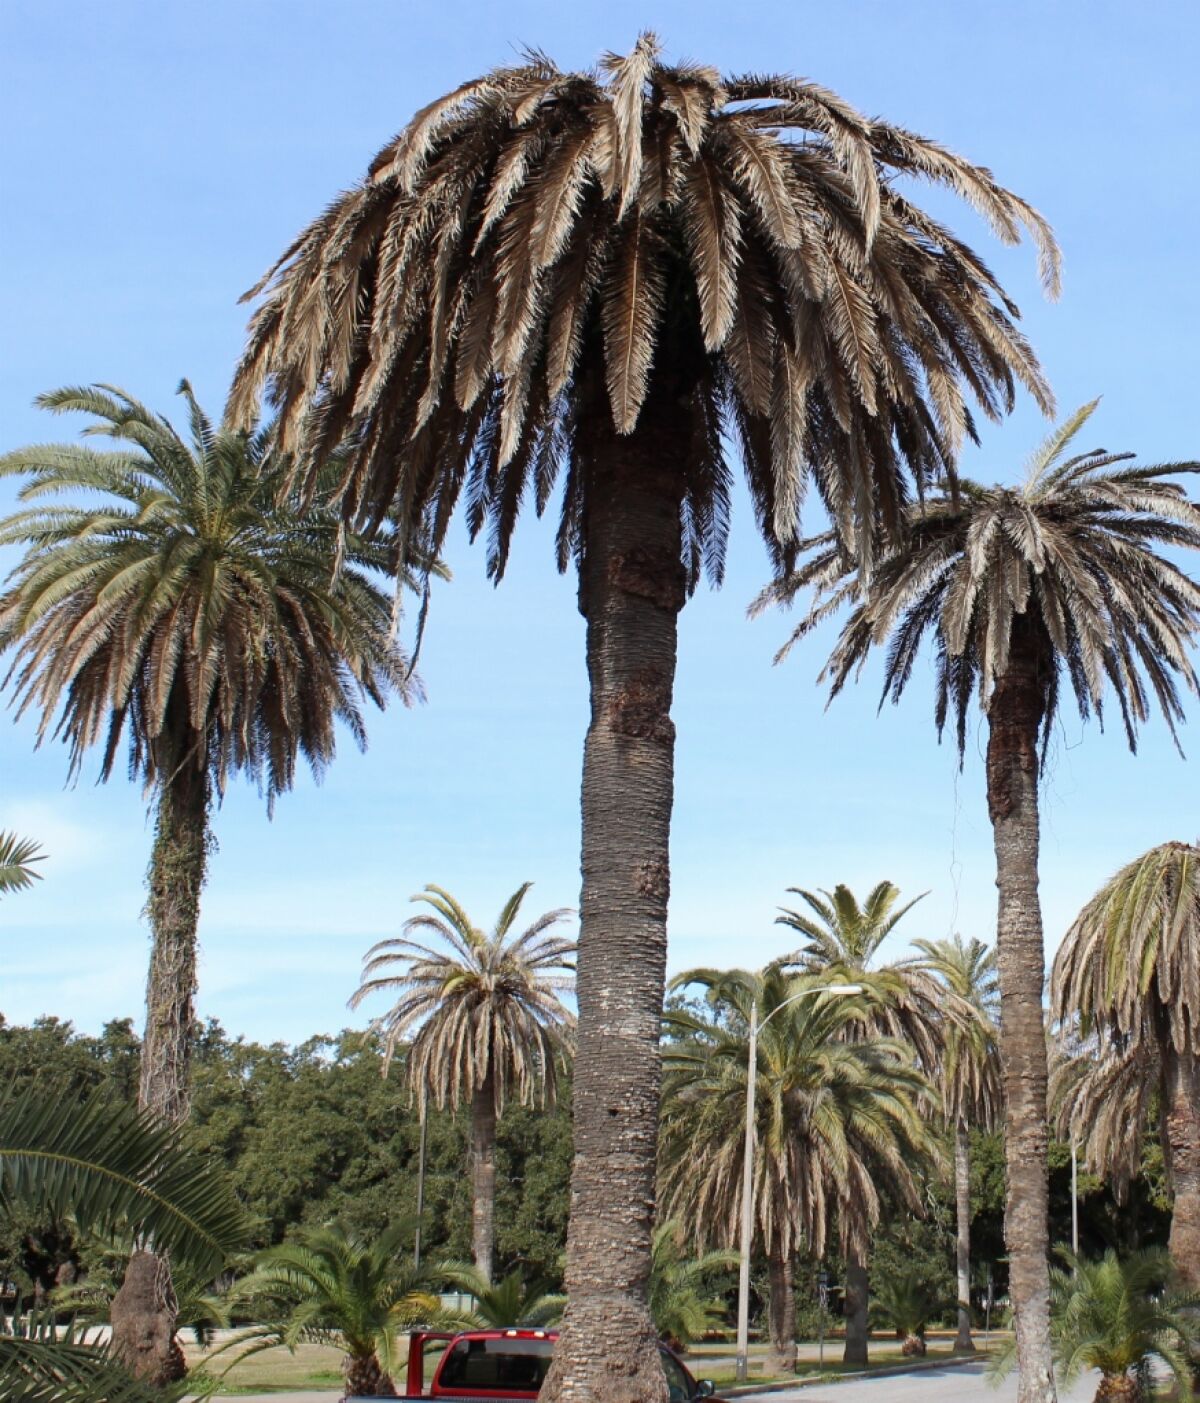 Palm trees in Point Loma show signs of palm weevil infestation.